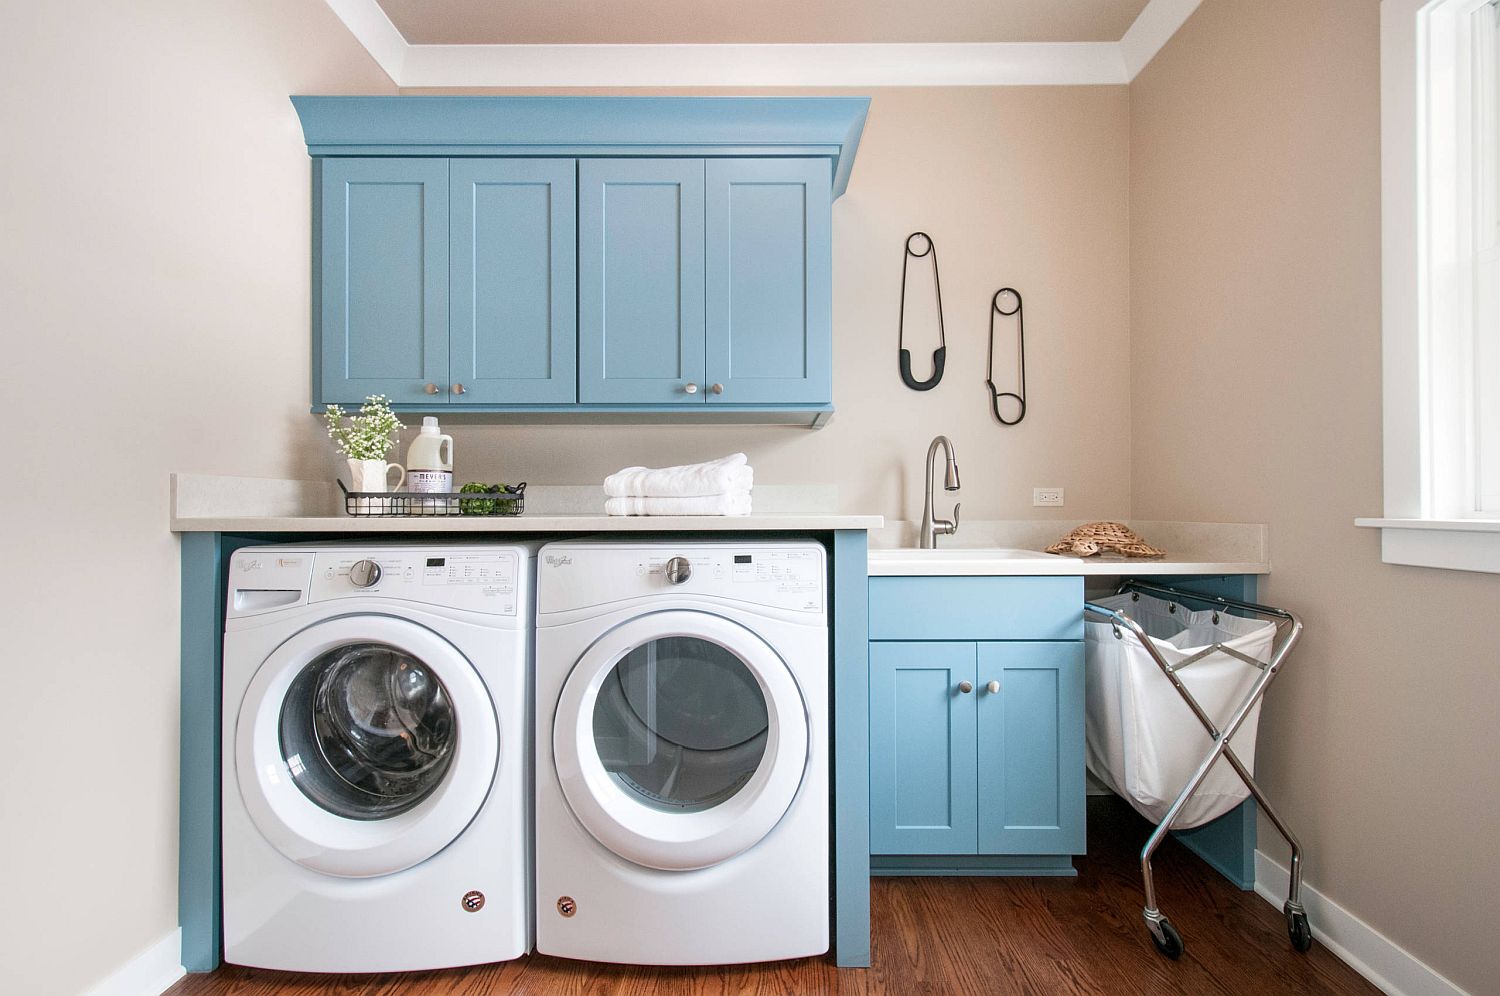 Gorgeous transitional laundry room in white and blue with landry bag and much more